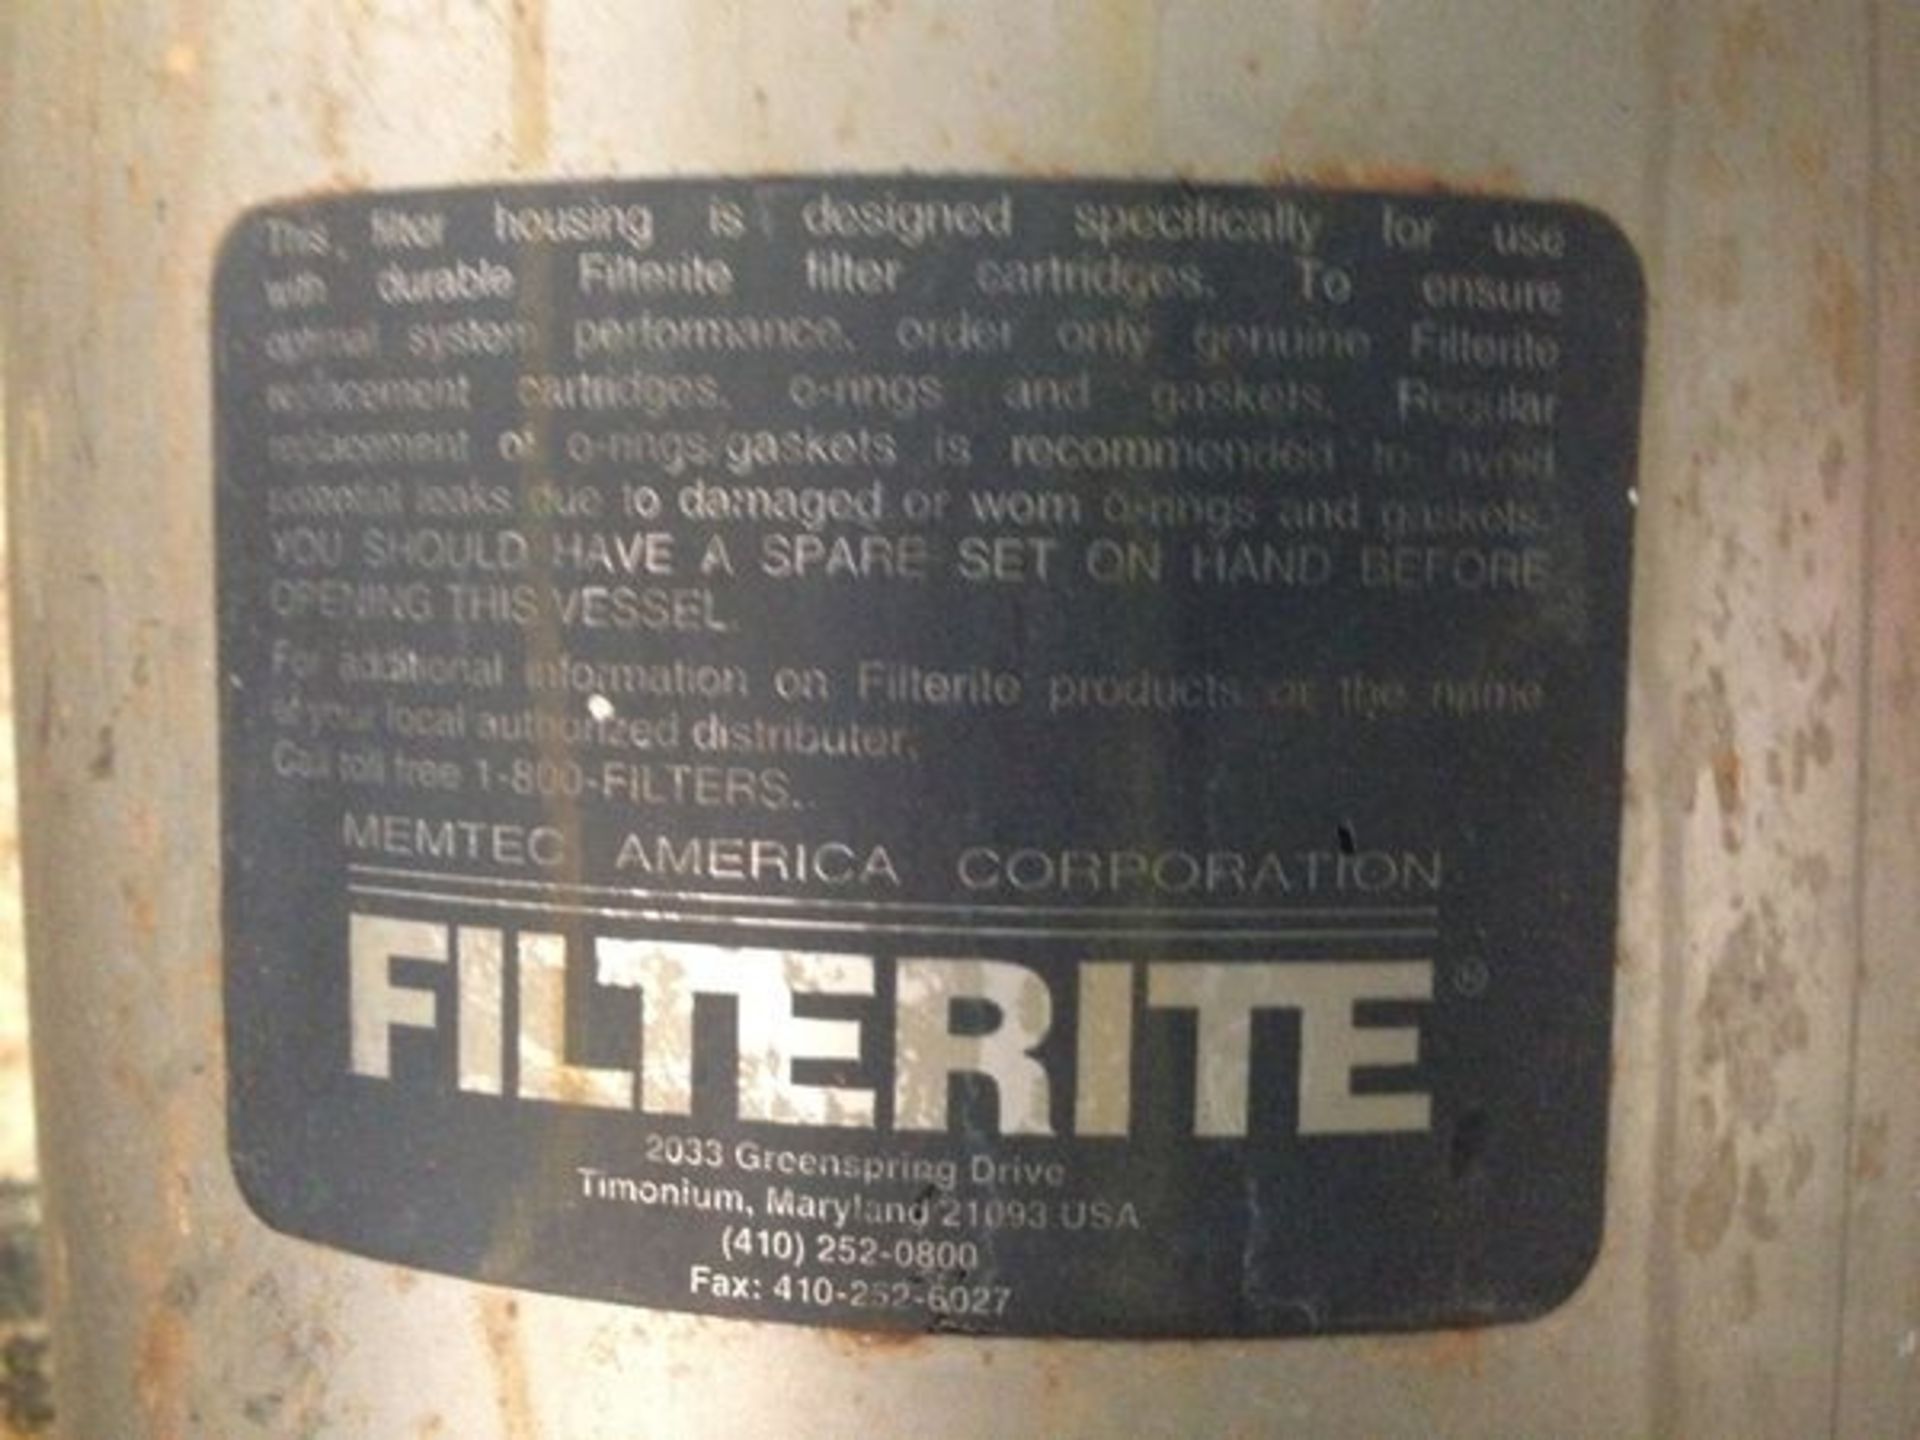 Filterite Water Polishers with Filters Model: 910717-000 S/N: LG Pressure 150 PSIG at 200 Degrees, - Image 4 of 5